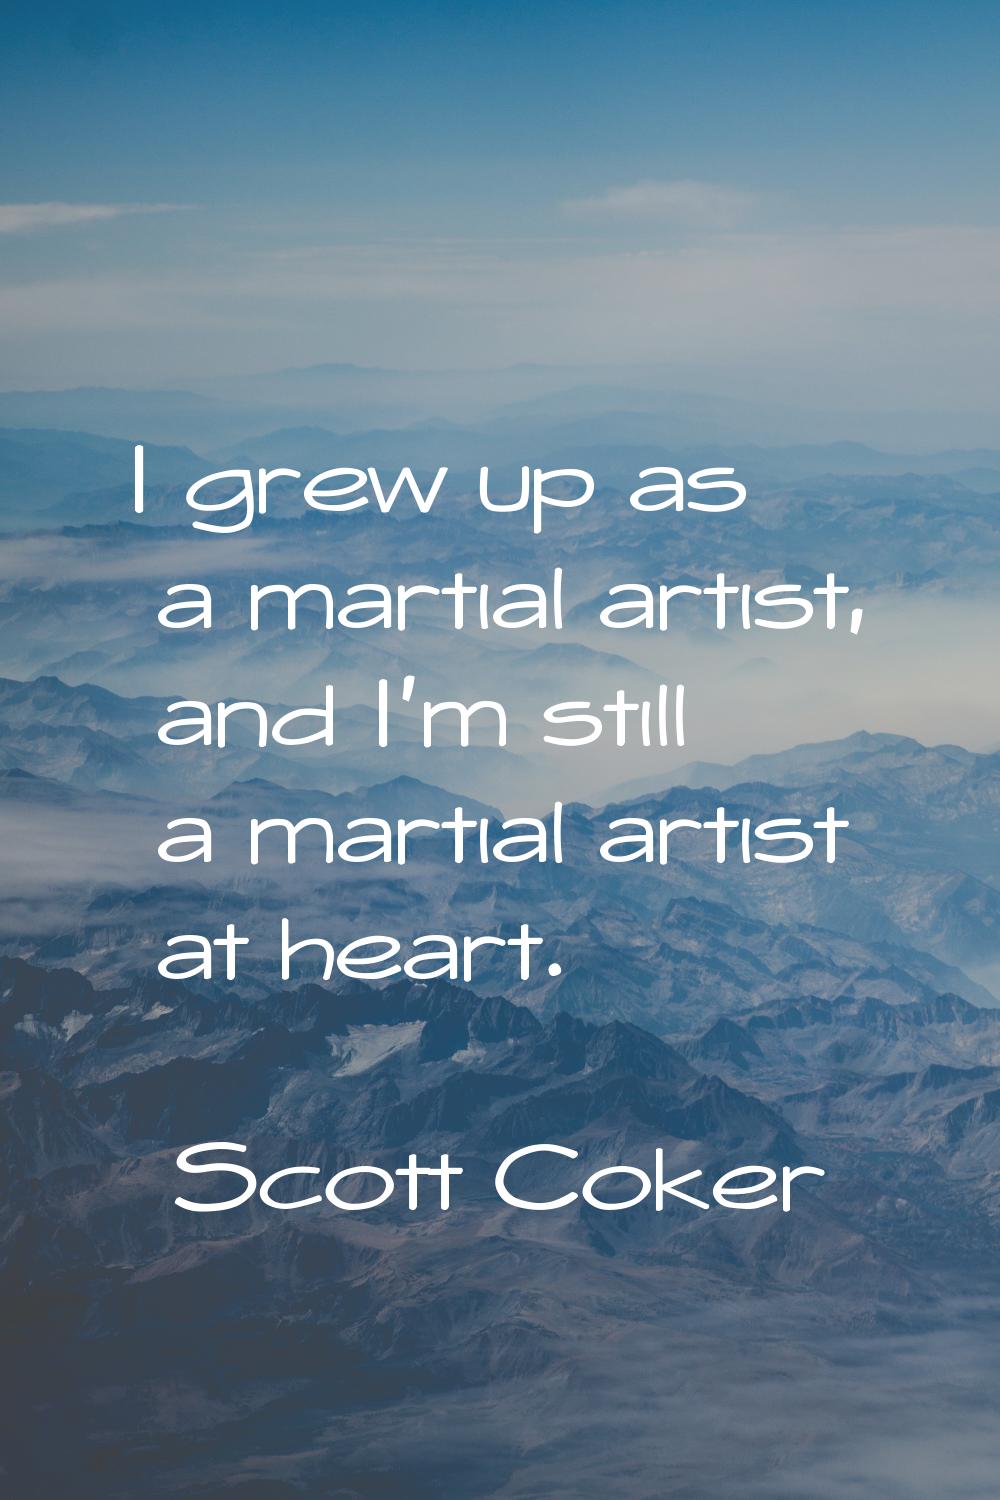 I grew up as a martial artist, and I'm still a martial artist at heart.